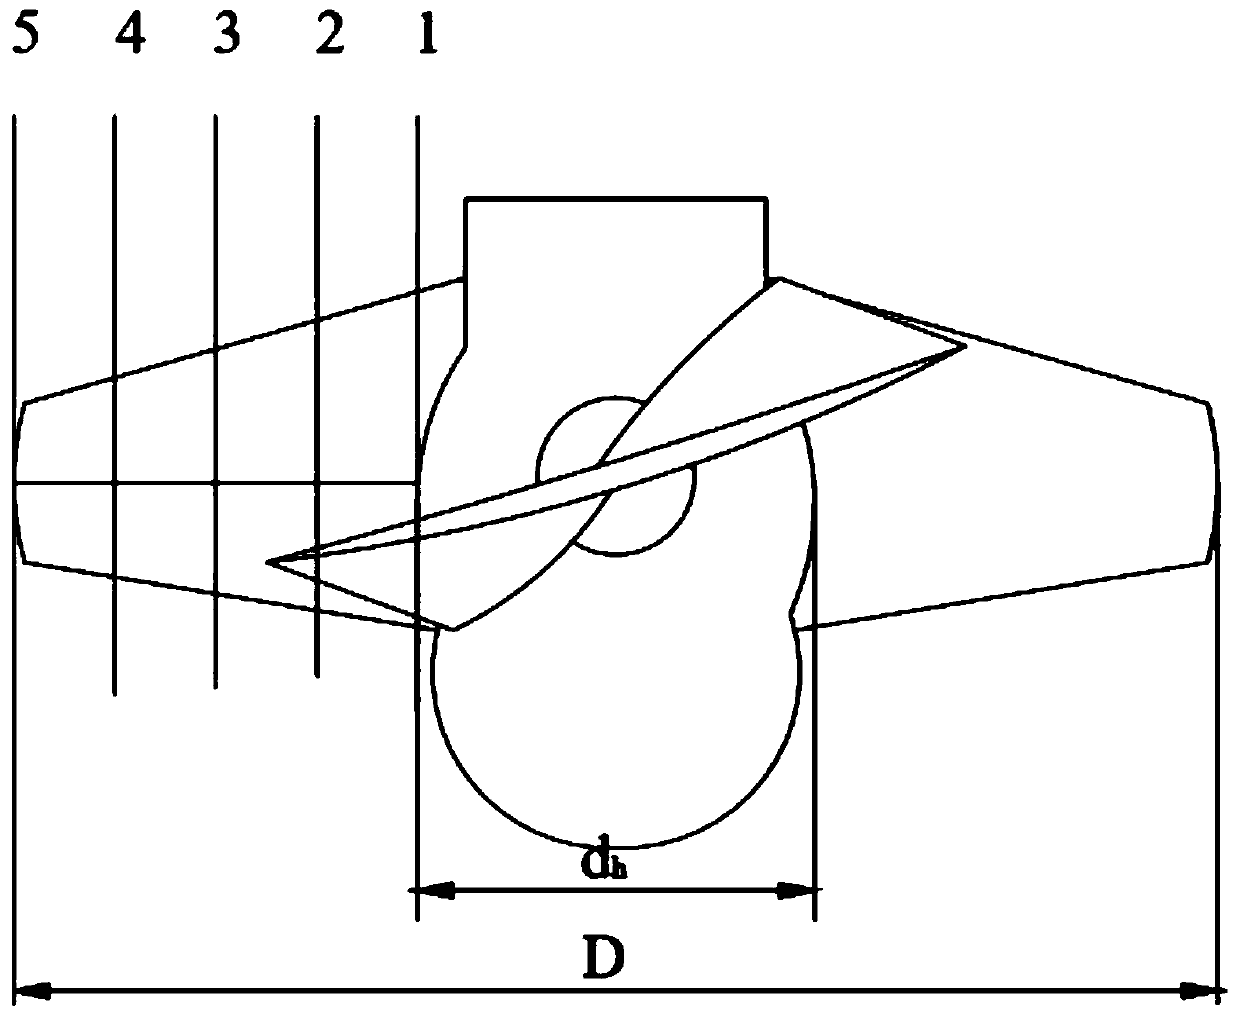 A Design Method of Axial Flow Pump Impeller Based on Wheelbase